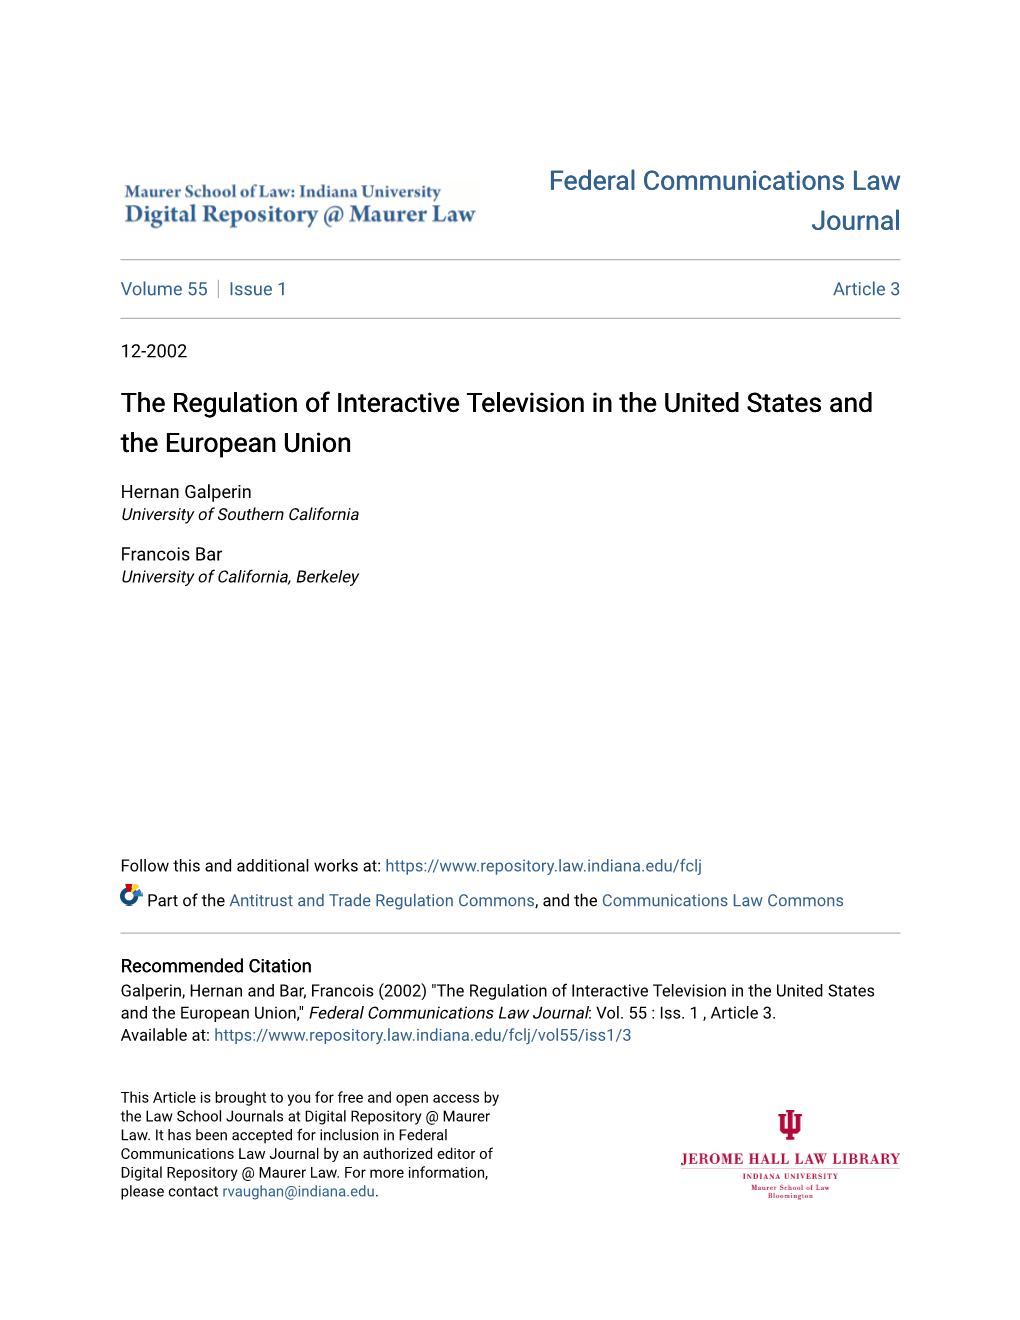 The Regulation of Interactive Television in the United States and the European Union